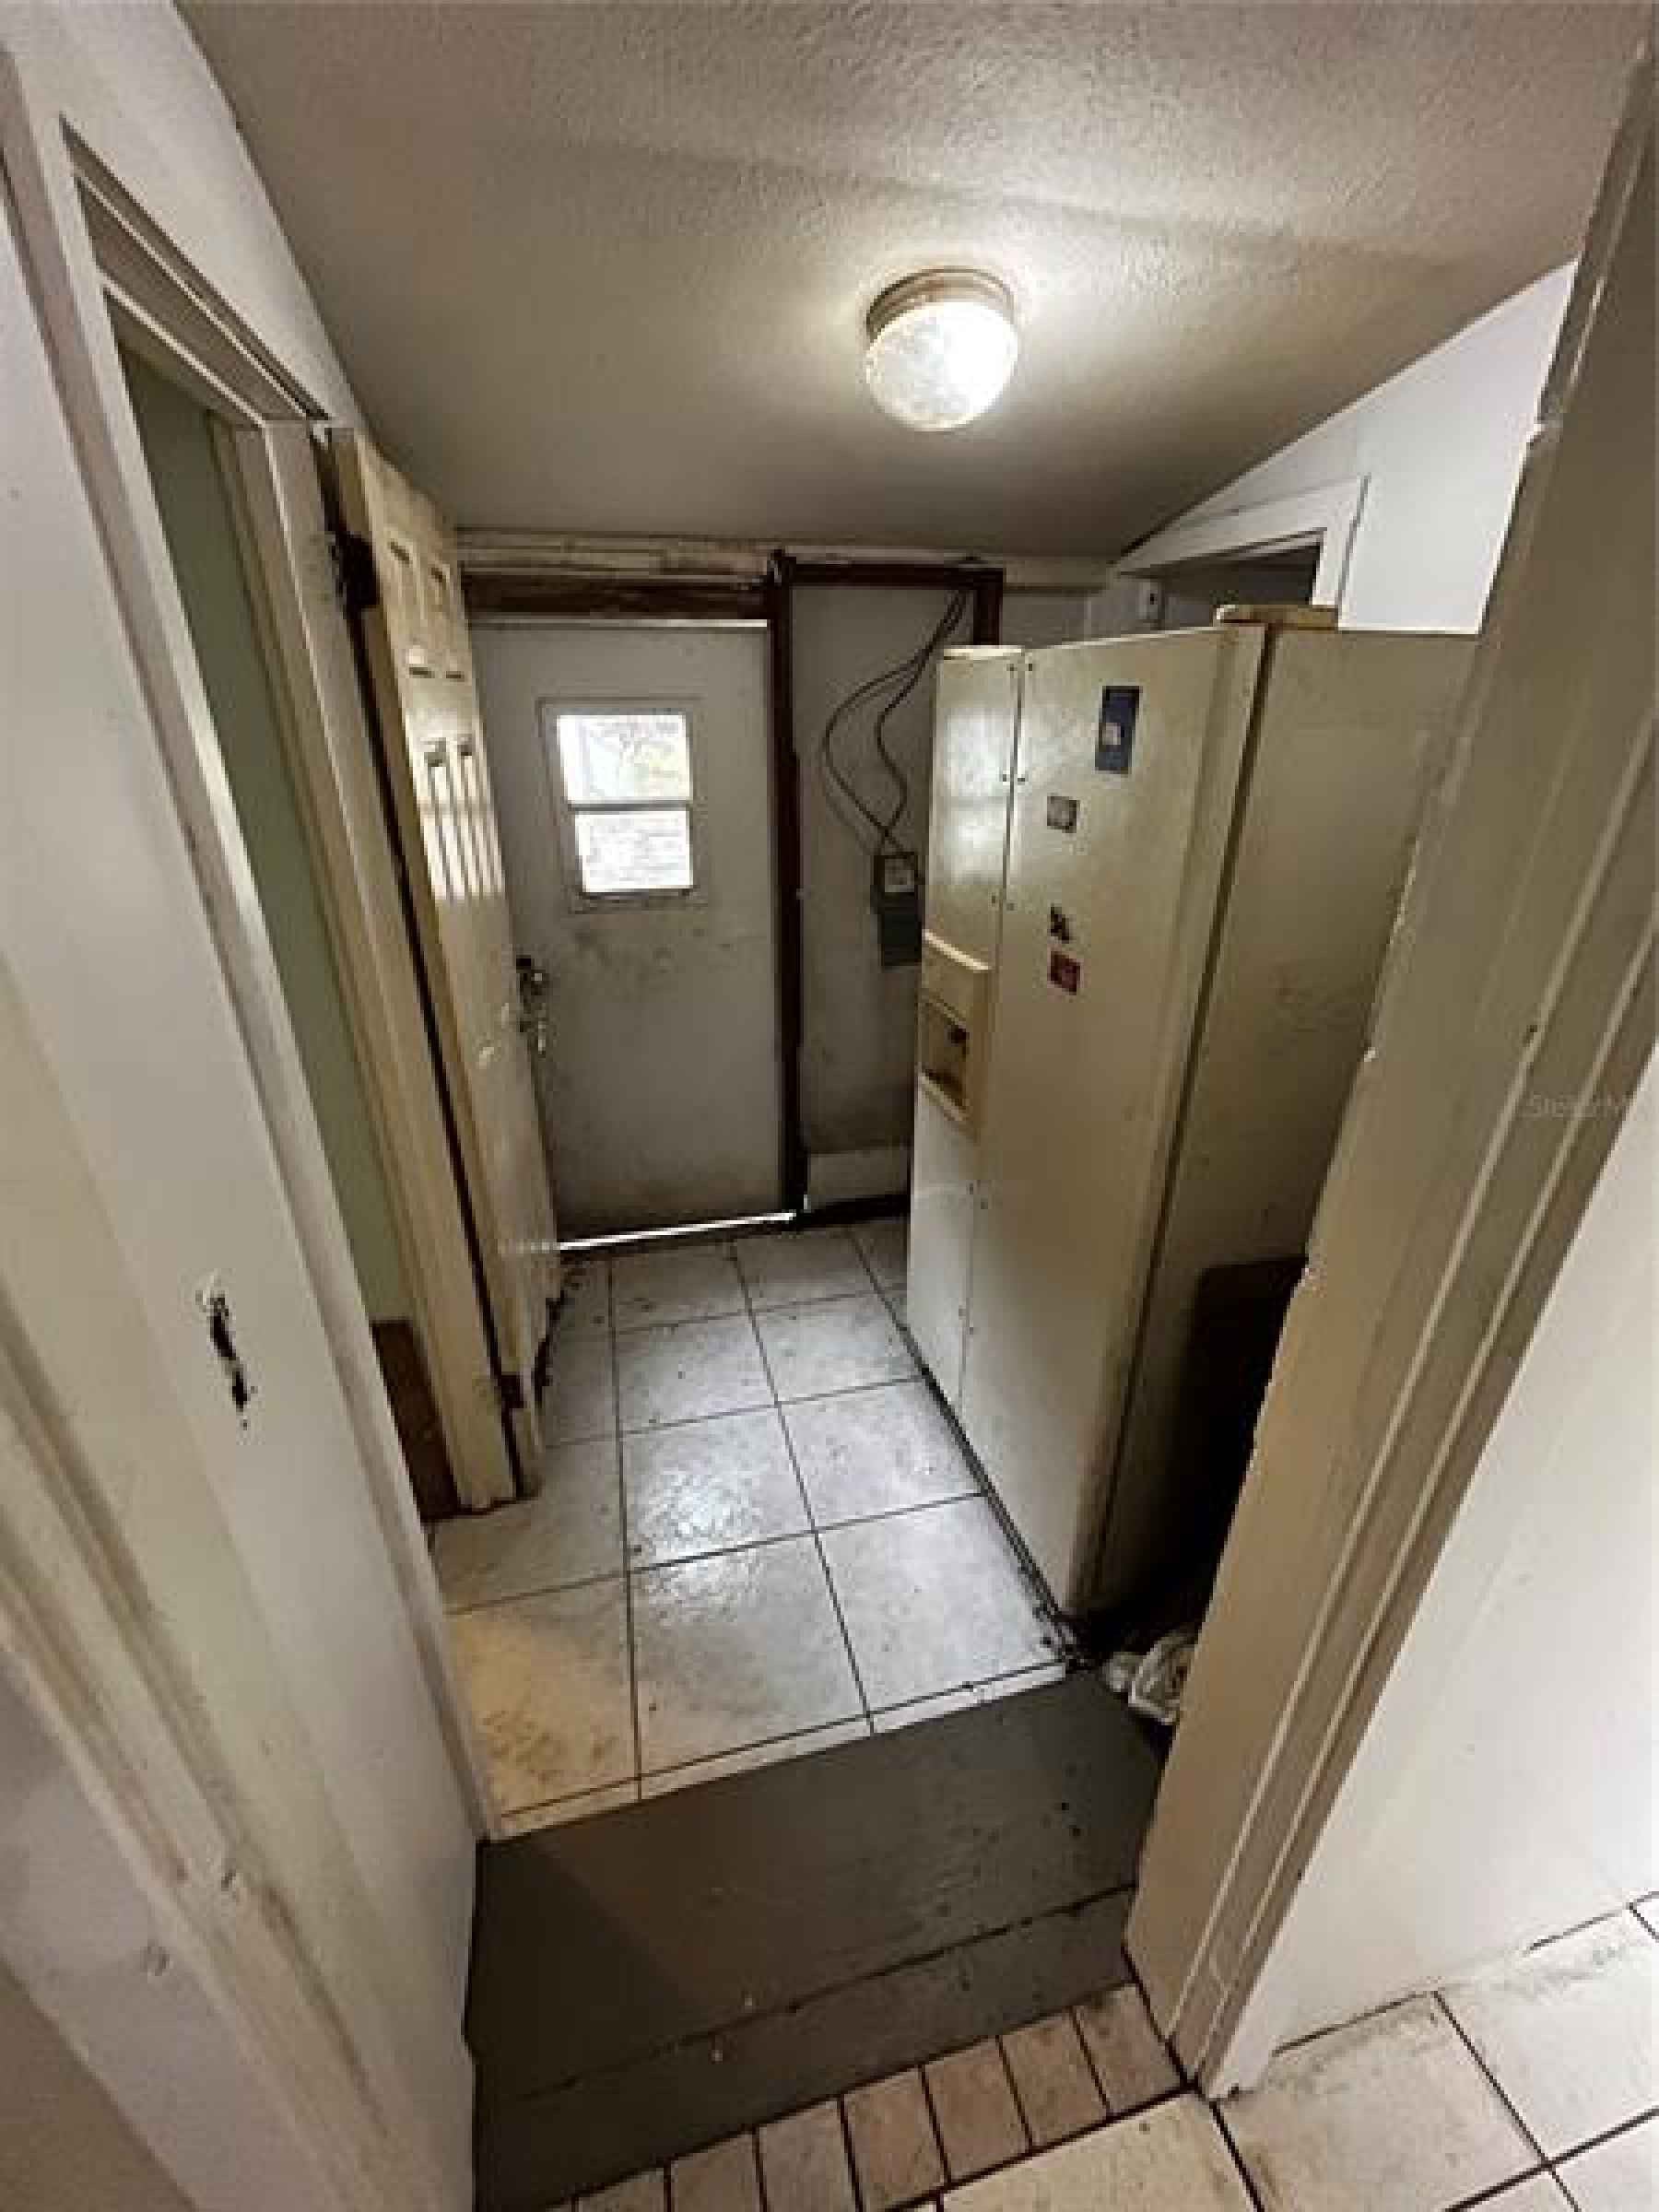 Hallway to back door. Bathroom on the left and utility room on the right.